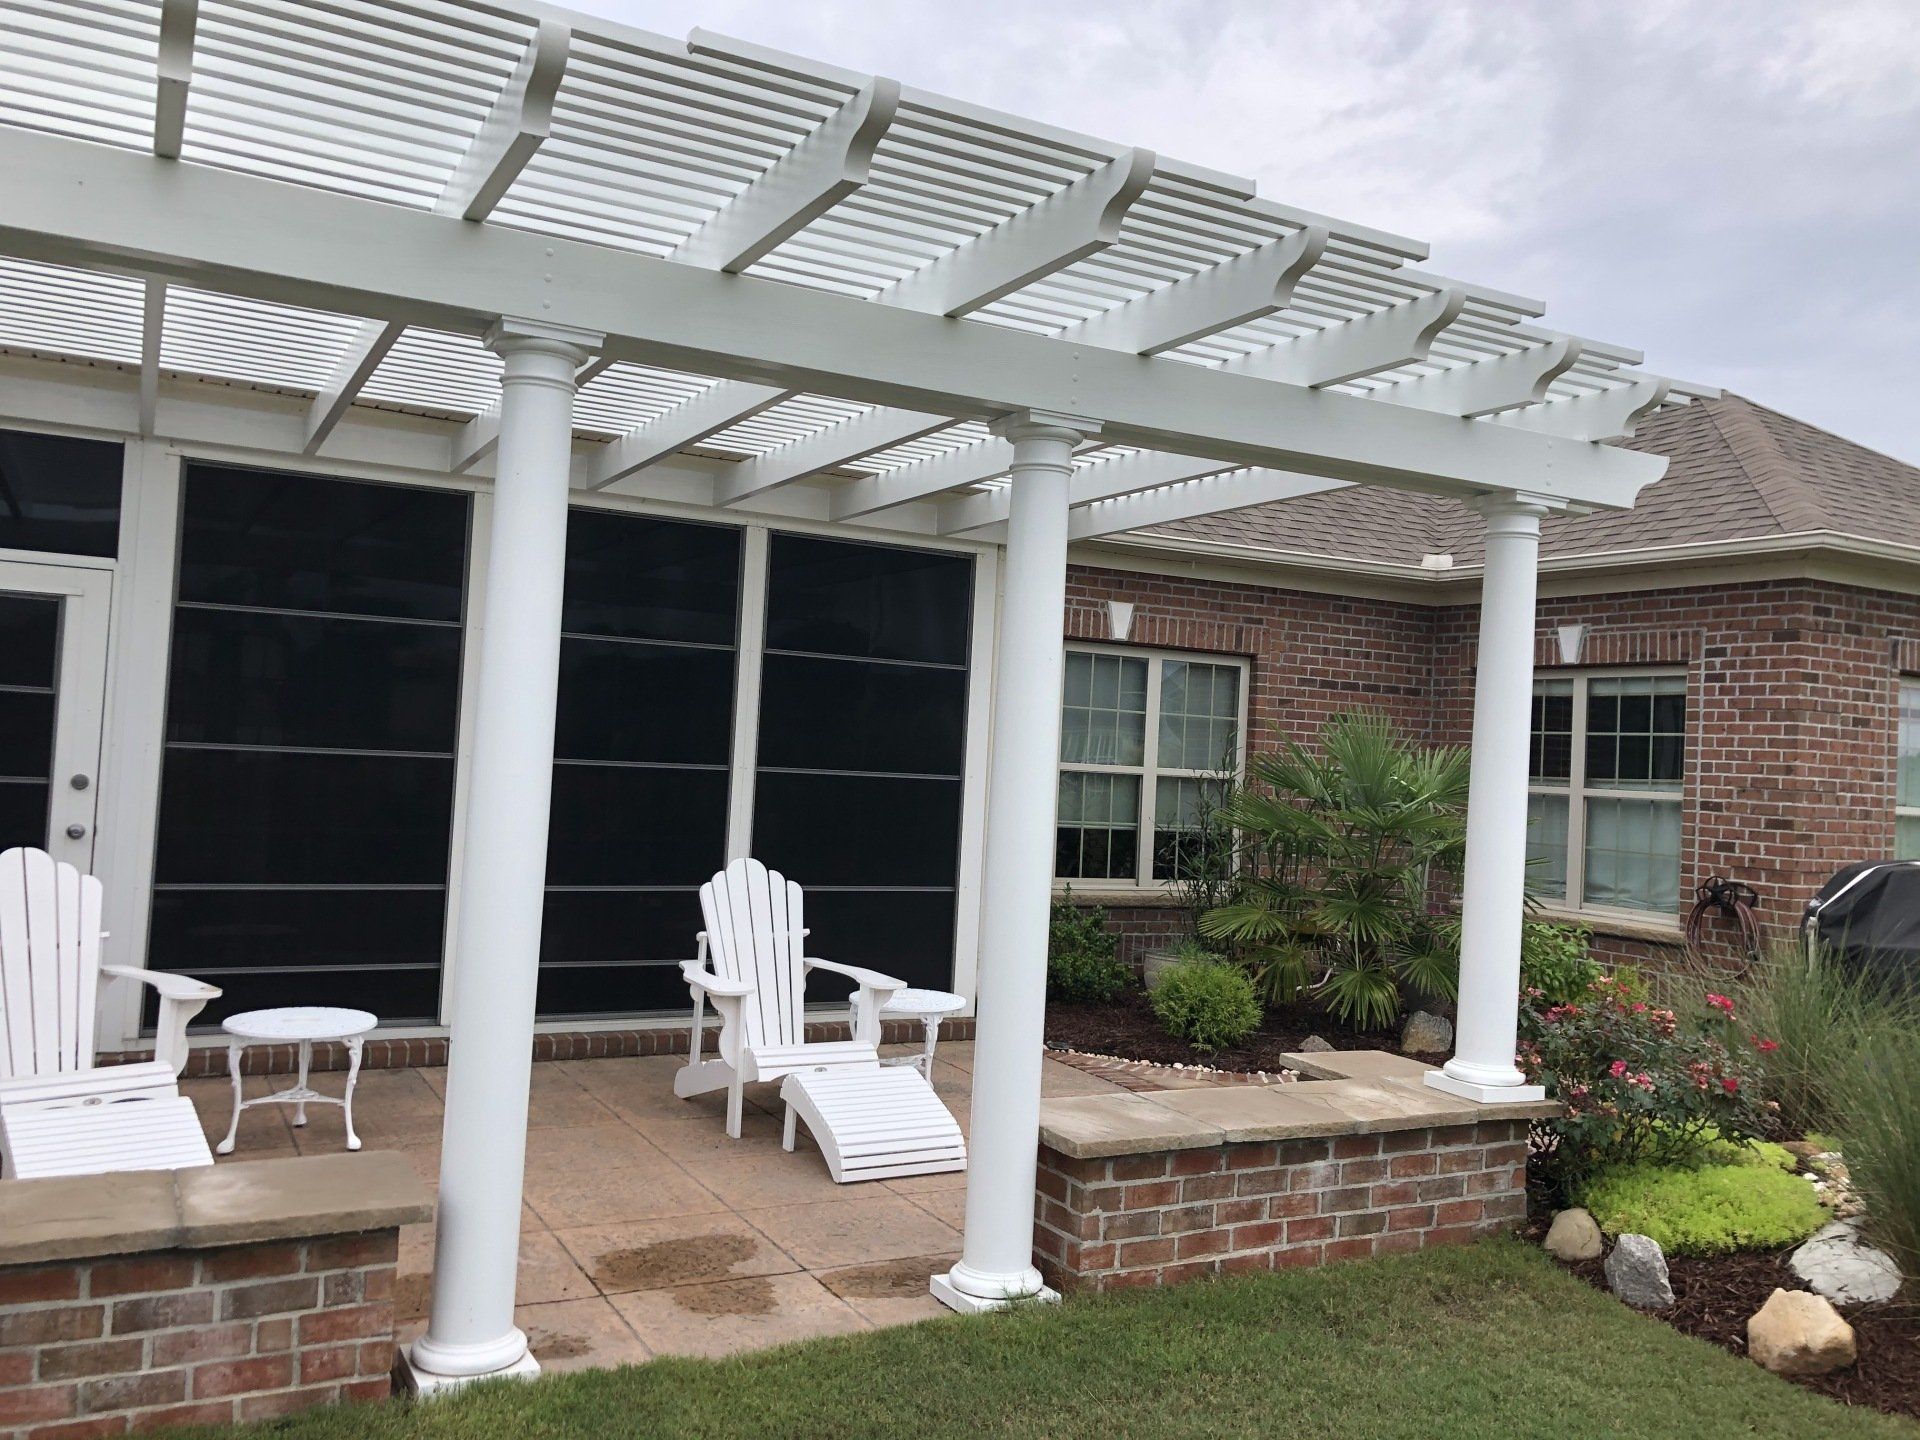 New pergola with white pillars and a outdoor patio